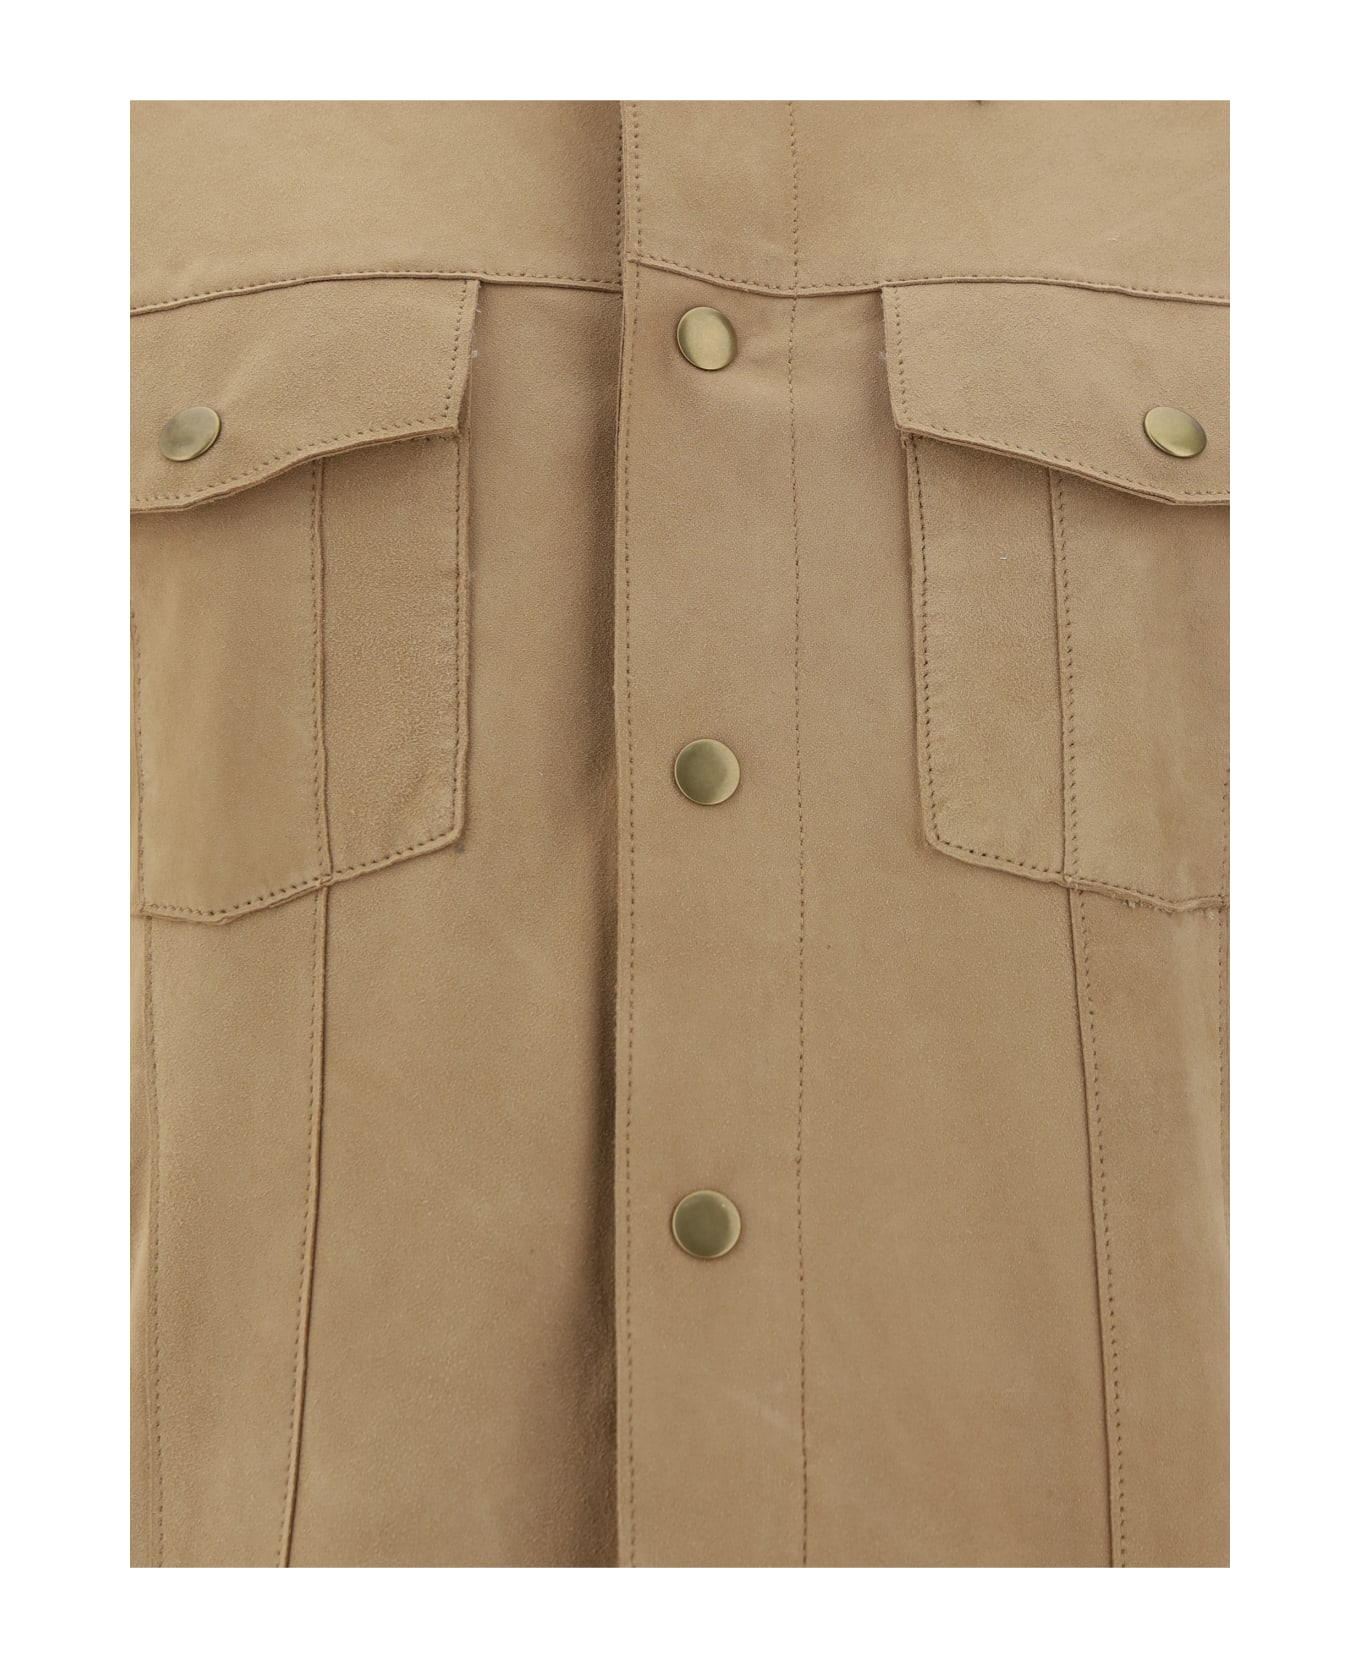 D'Amico Leather Jacket - Suede Beach Beige